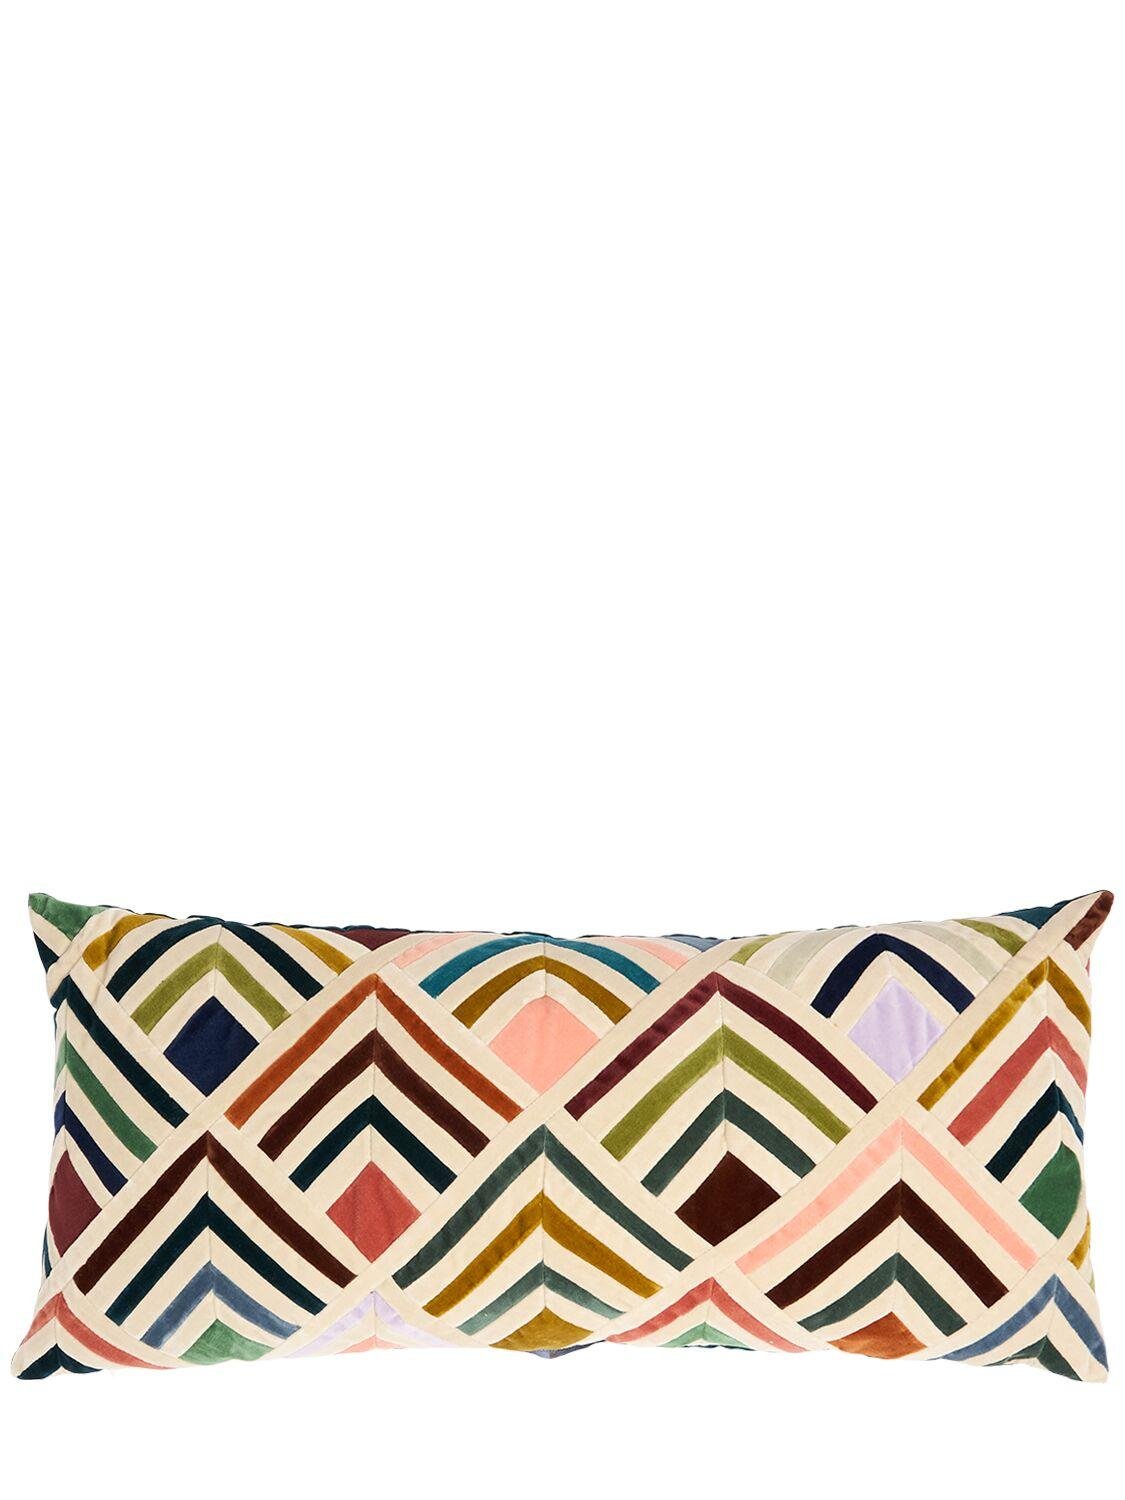 Tallulah Cotton Cushion by CHRISTINA LUNDSTEEN